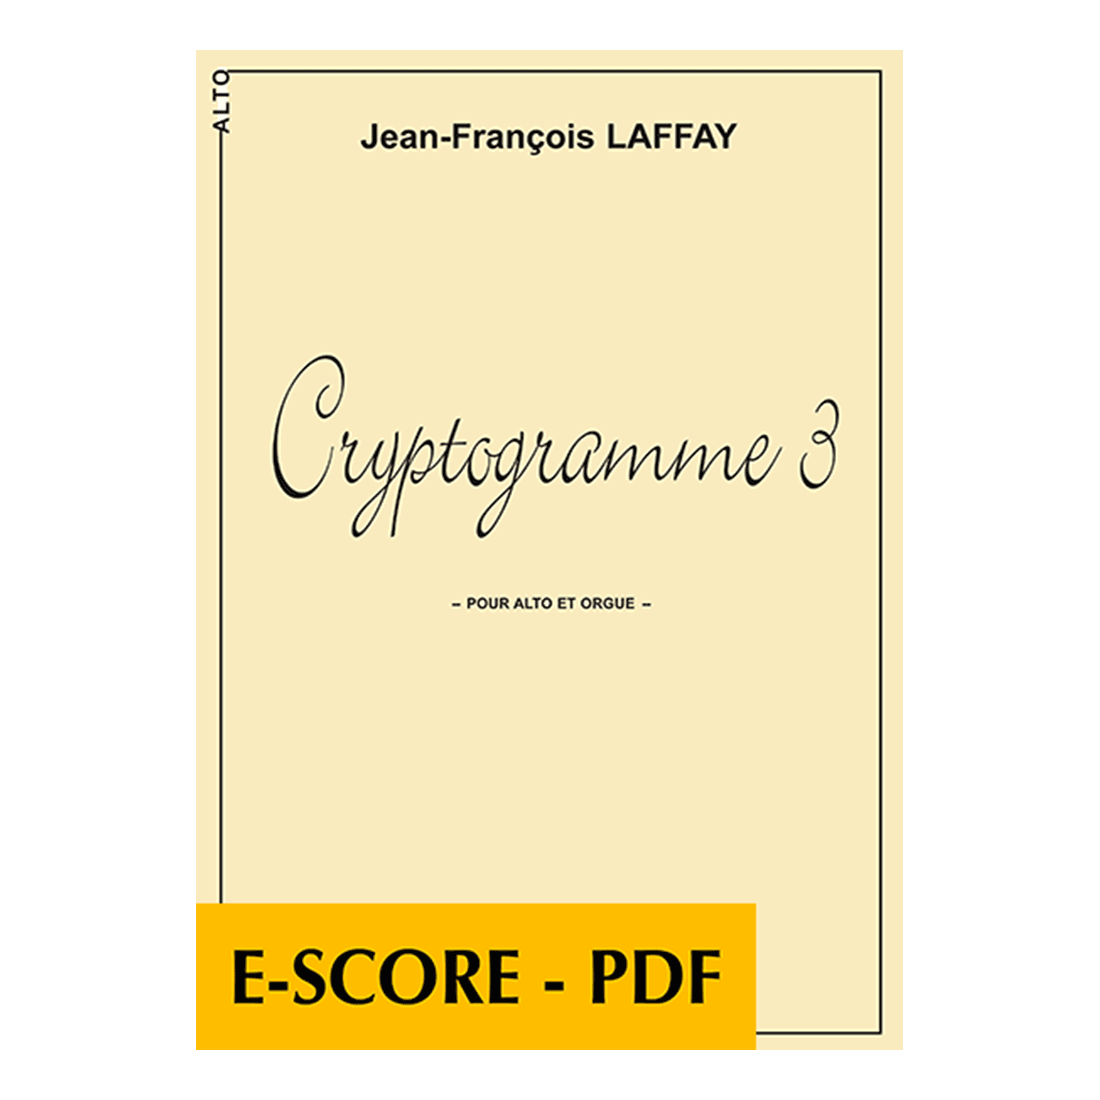 Cryptogramme 3 for viola and organ - E-score PDF